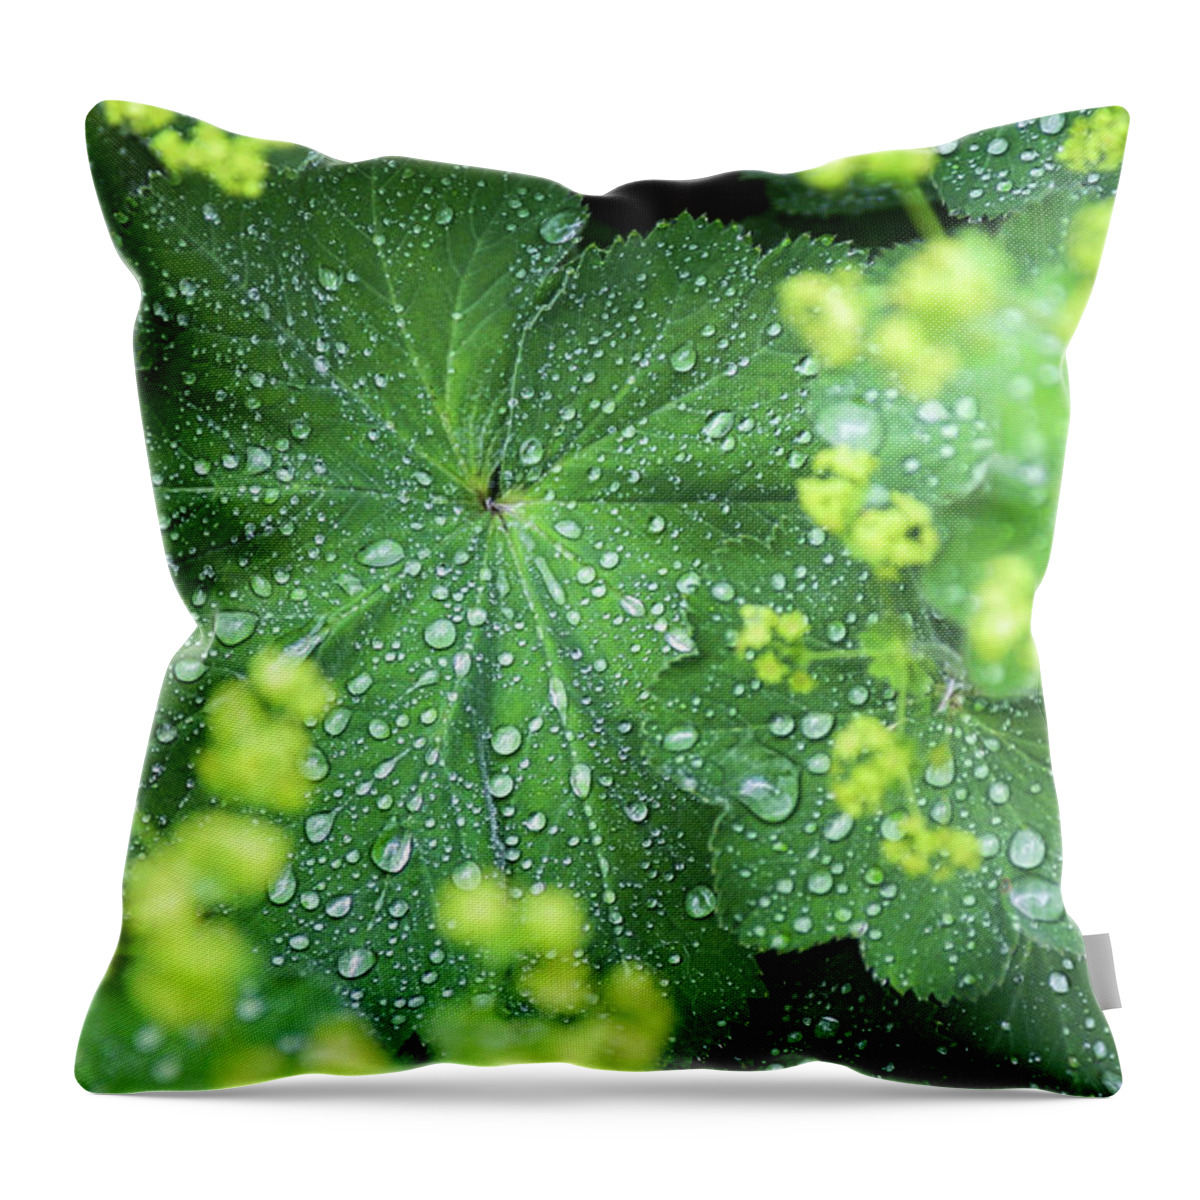 Ladys Mantle Throw Pillow featuring the photograph Flowering Lady's Mantle - by Julie Weber